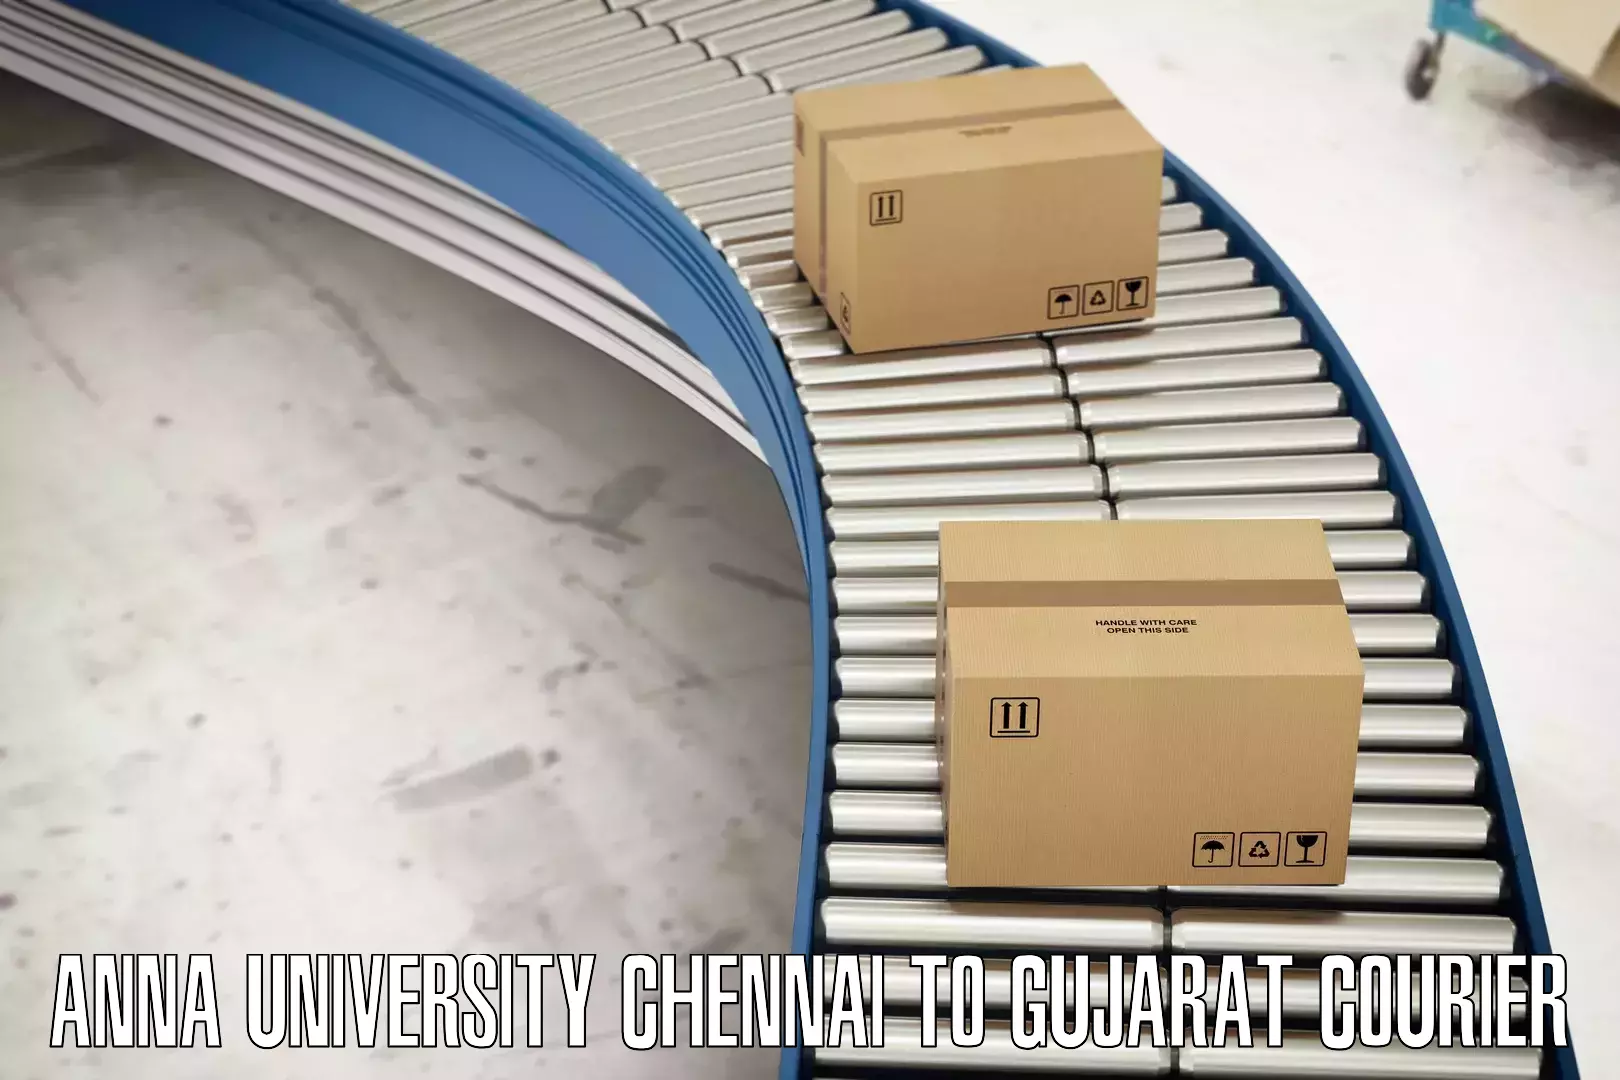 State-of-the-art courier technology in Anna University Chennai to Dayapar